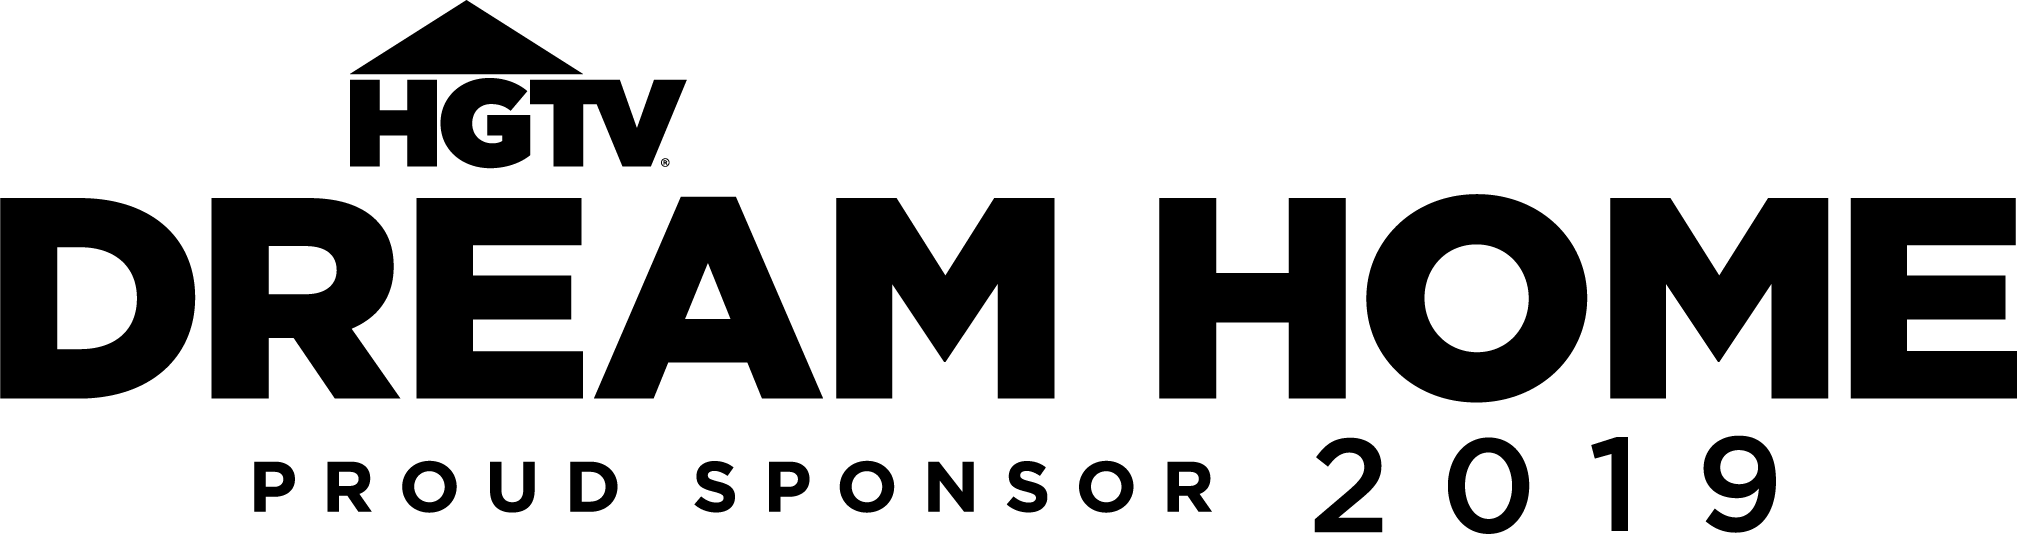 Hgtv.com Logo - HGTV Dream Home 2019: Delta Faucet Products Featured